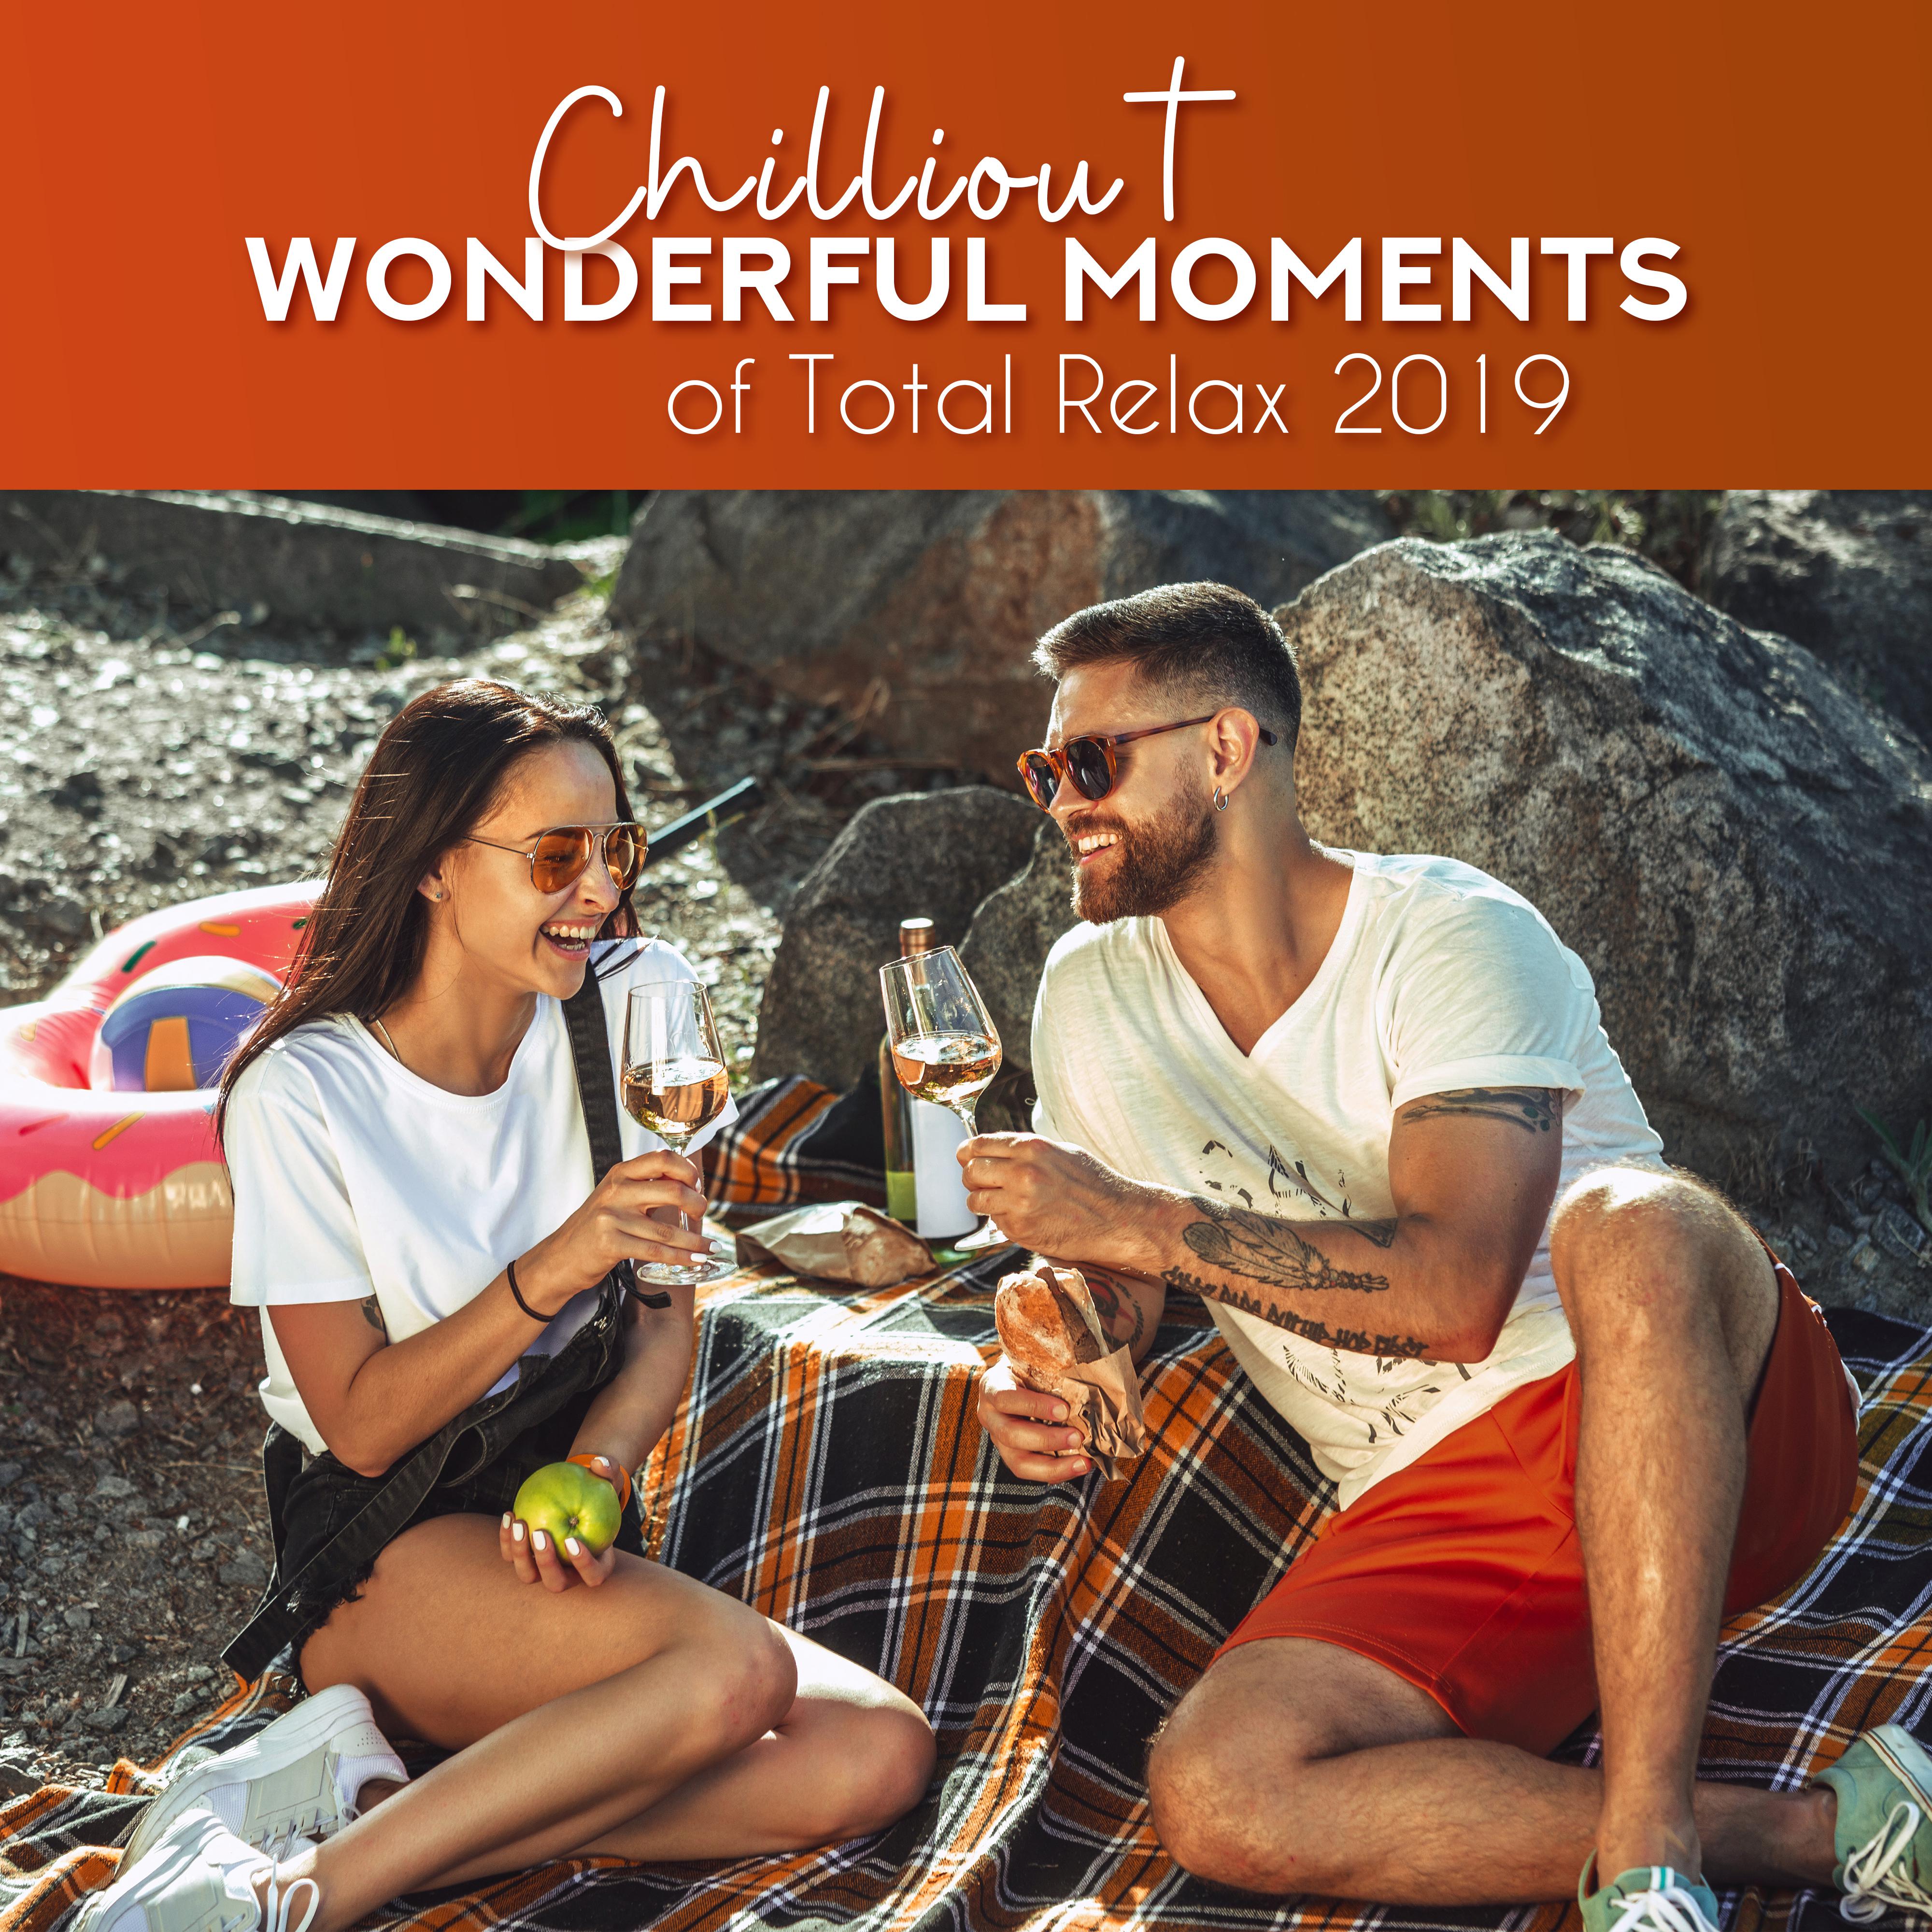 Chilliout Wonderful Moments of Total Relax 2019